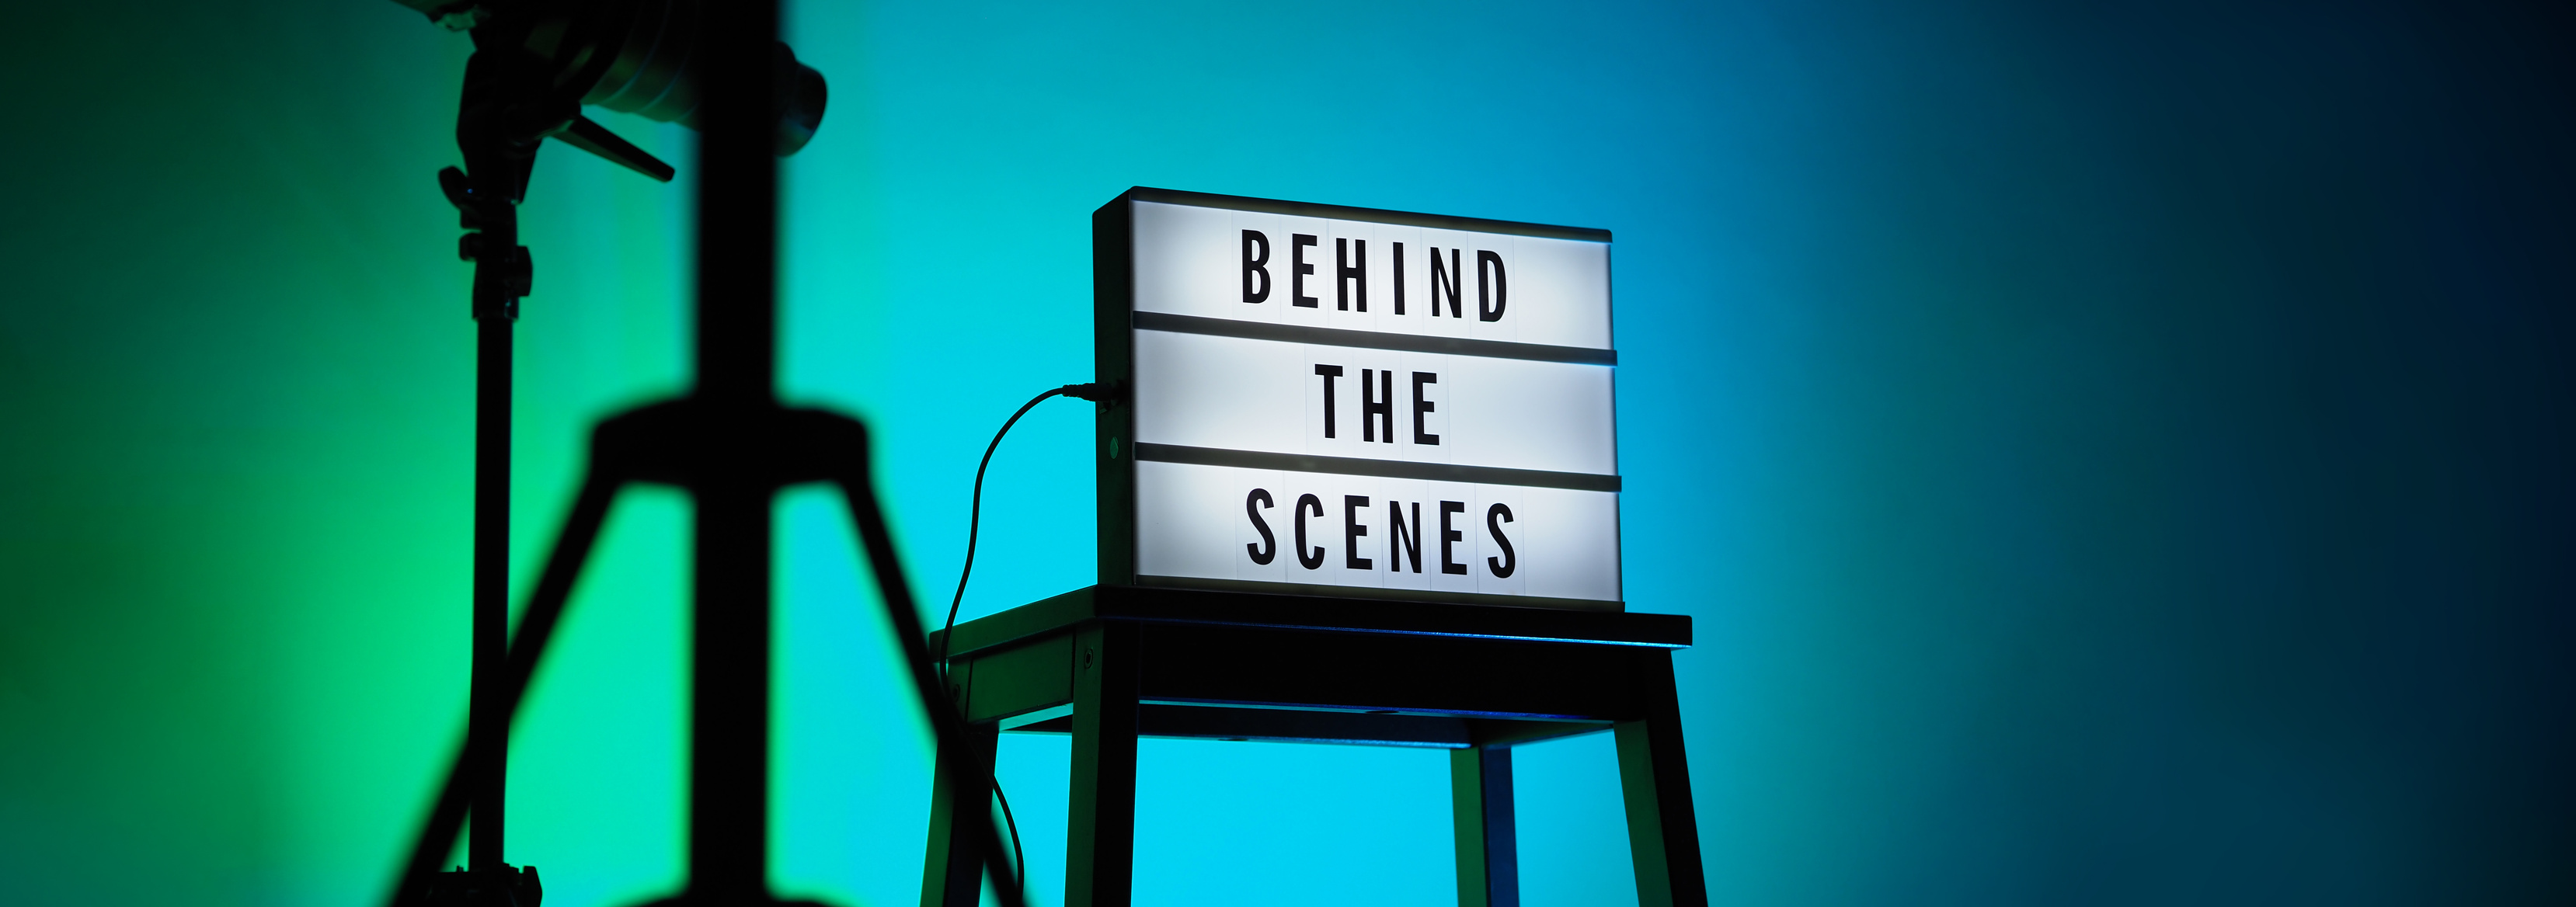 Behind the Scenes Words on a Light Box